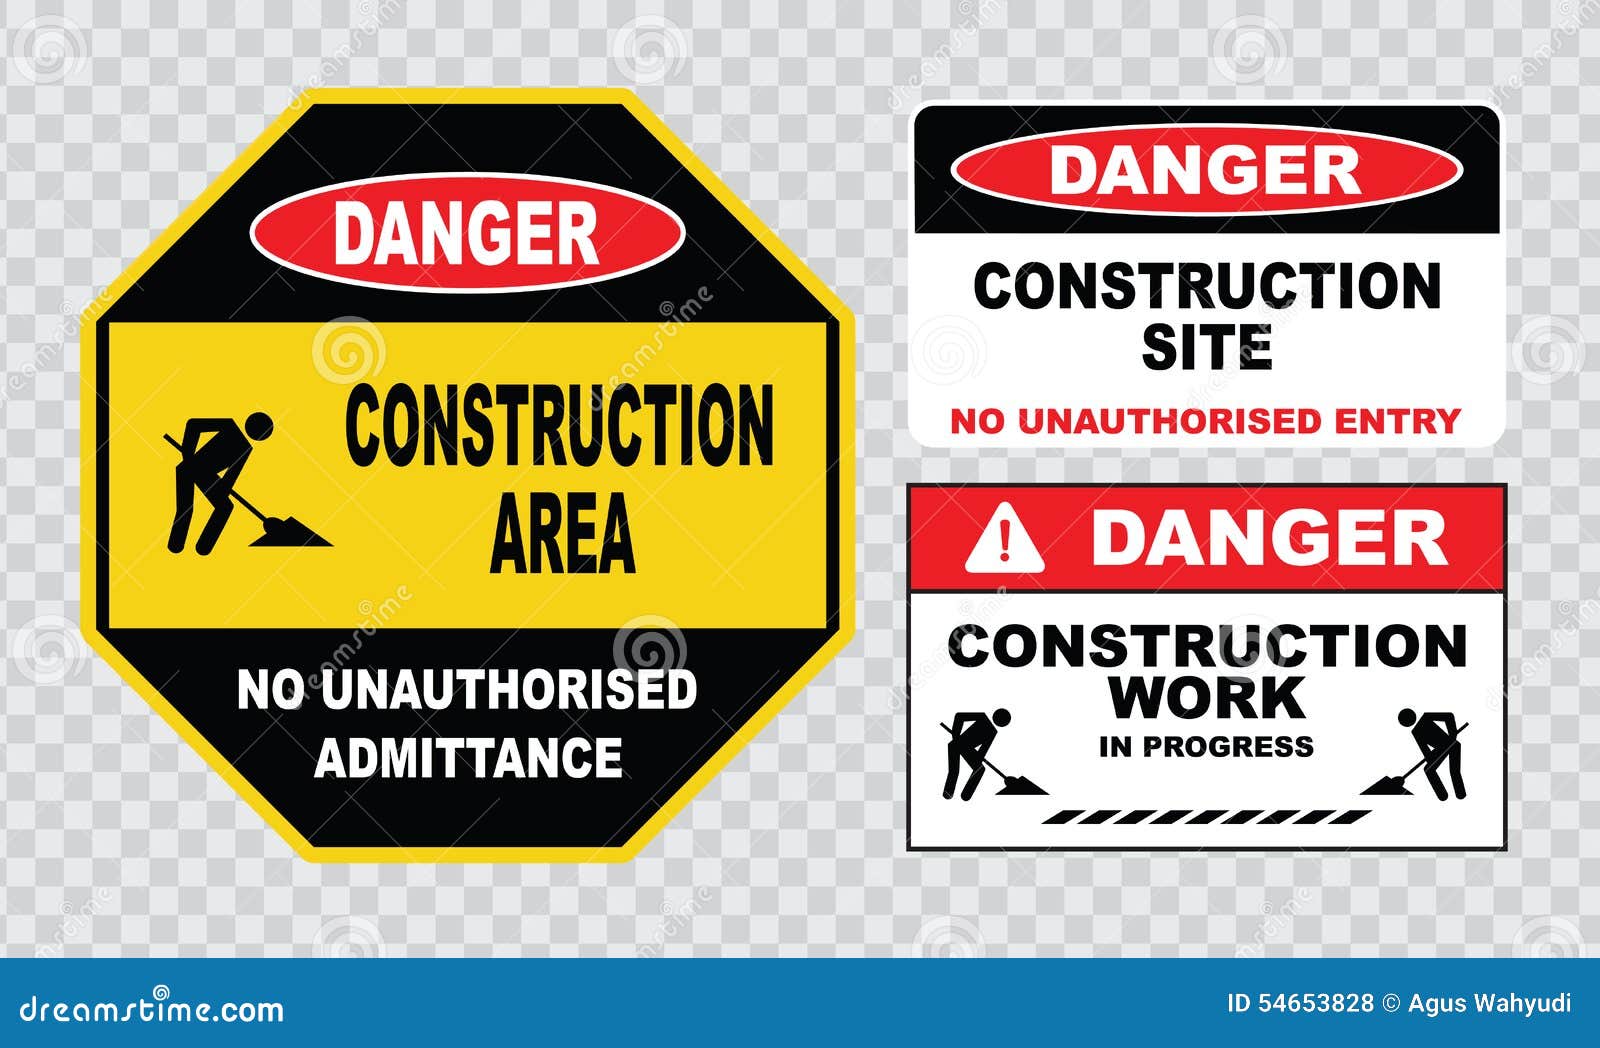 Site Safety Sign or Construction Safety Stock Illustration ...